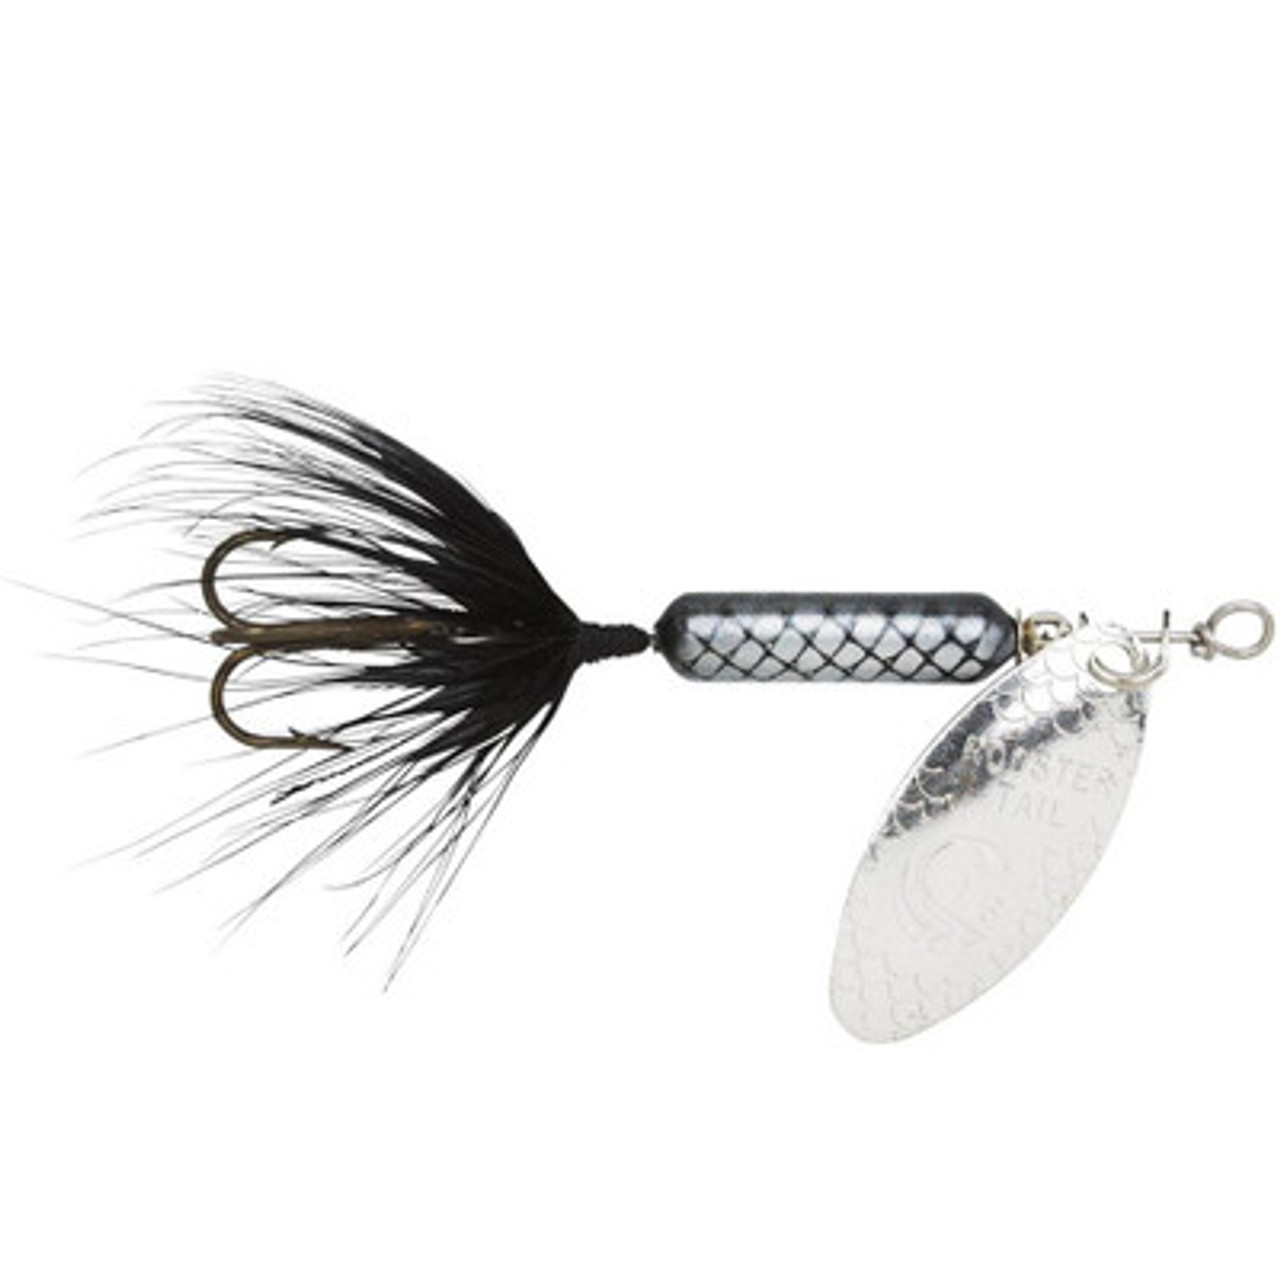 Wordens 208-BL Original RoosterTail Spinner Lure, 2 1/4-Inch, 1/8-ounce